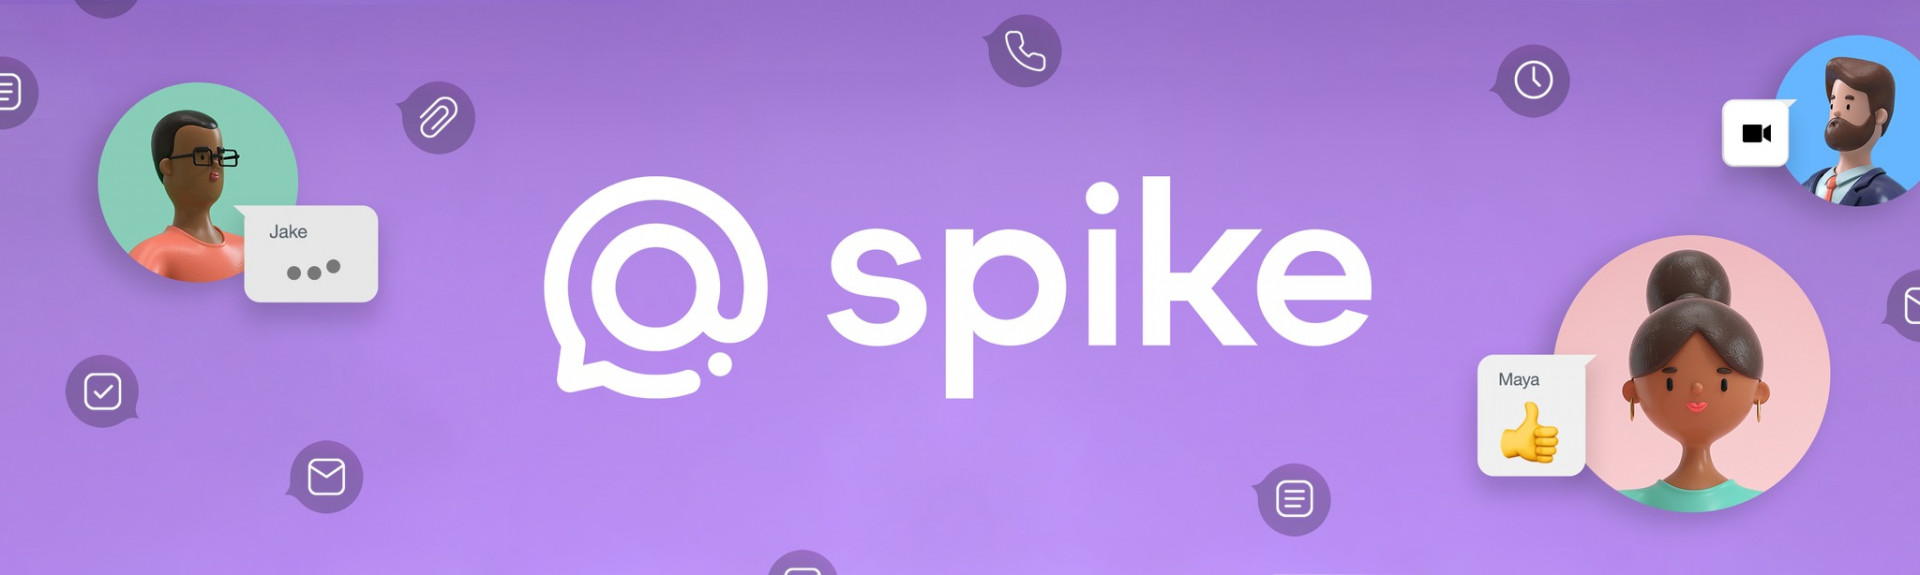 Spike Email - Mail & Team Chat